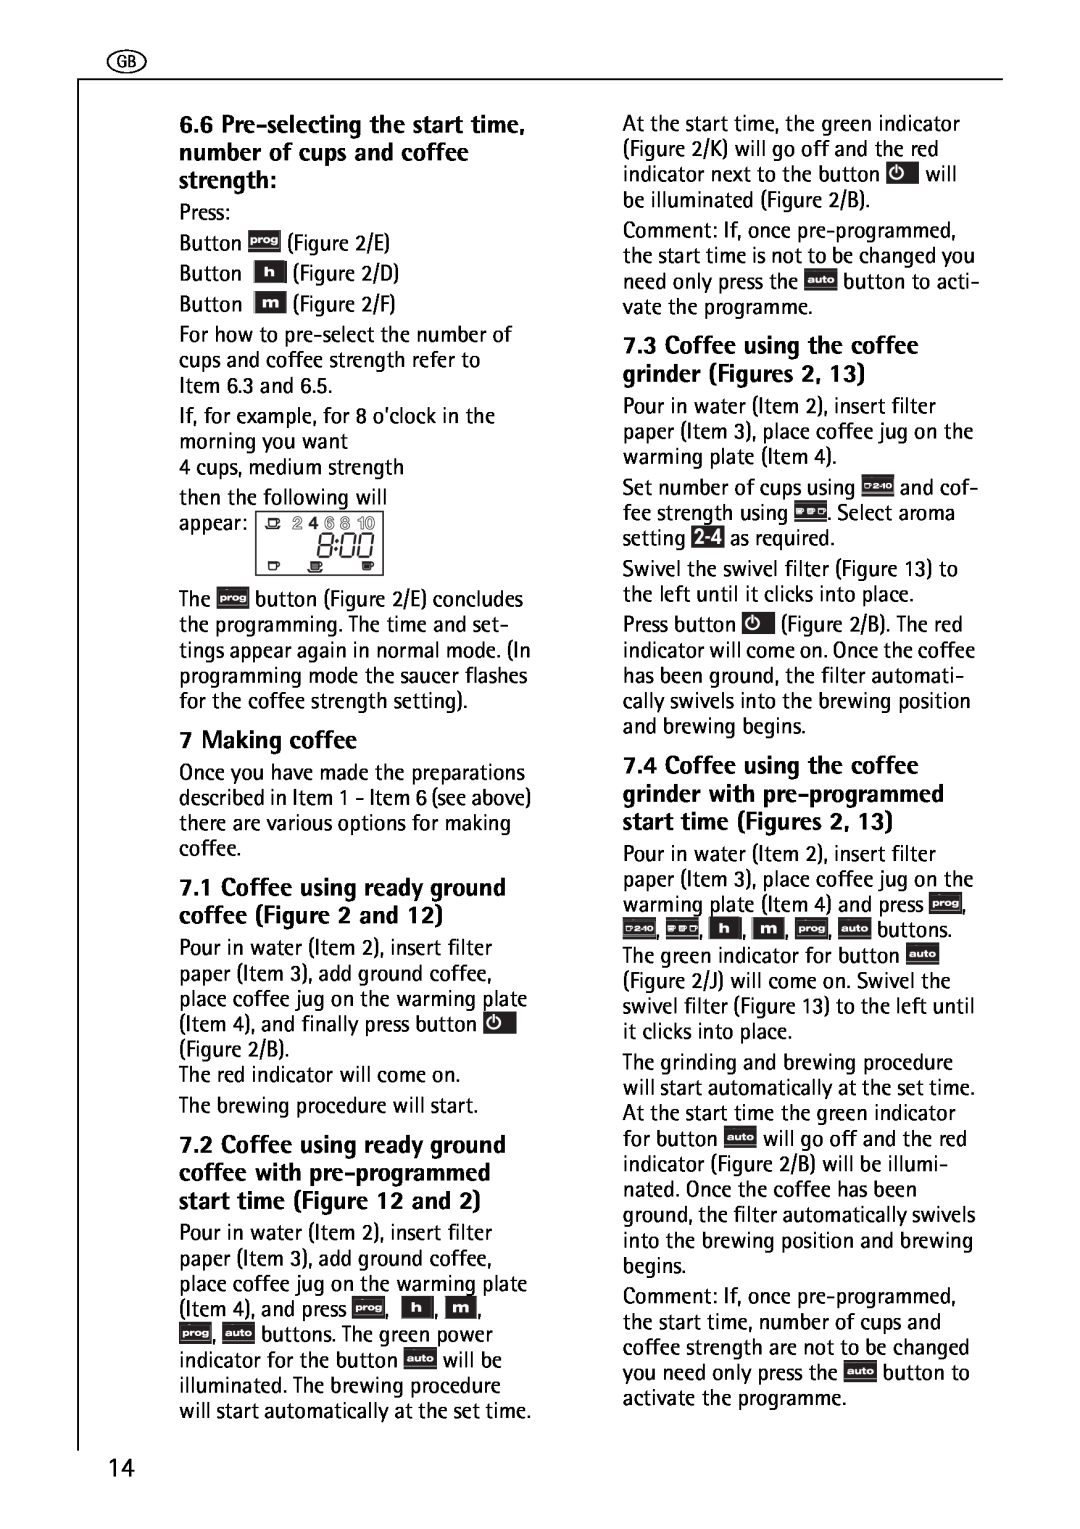 AEG KAM120 operating instructions Pre-selecting the start time, number of cups and coffee strength, Making coffee 